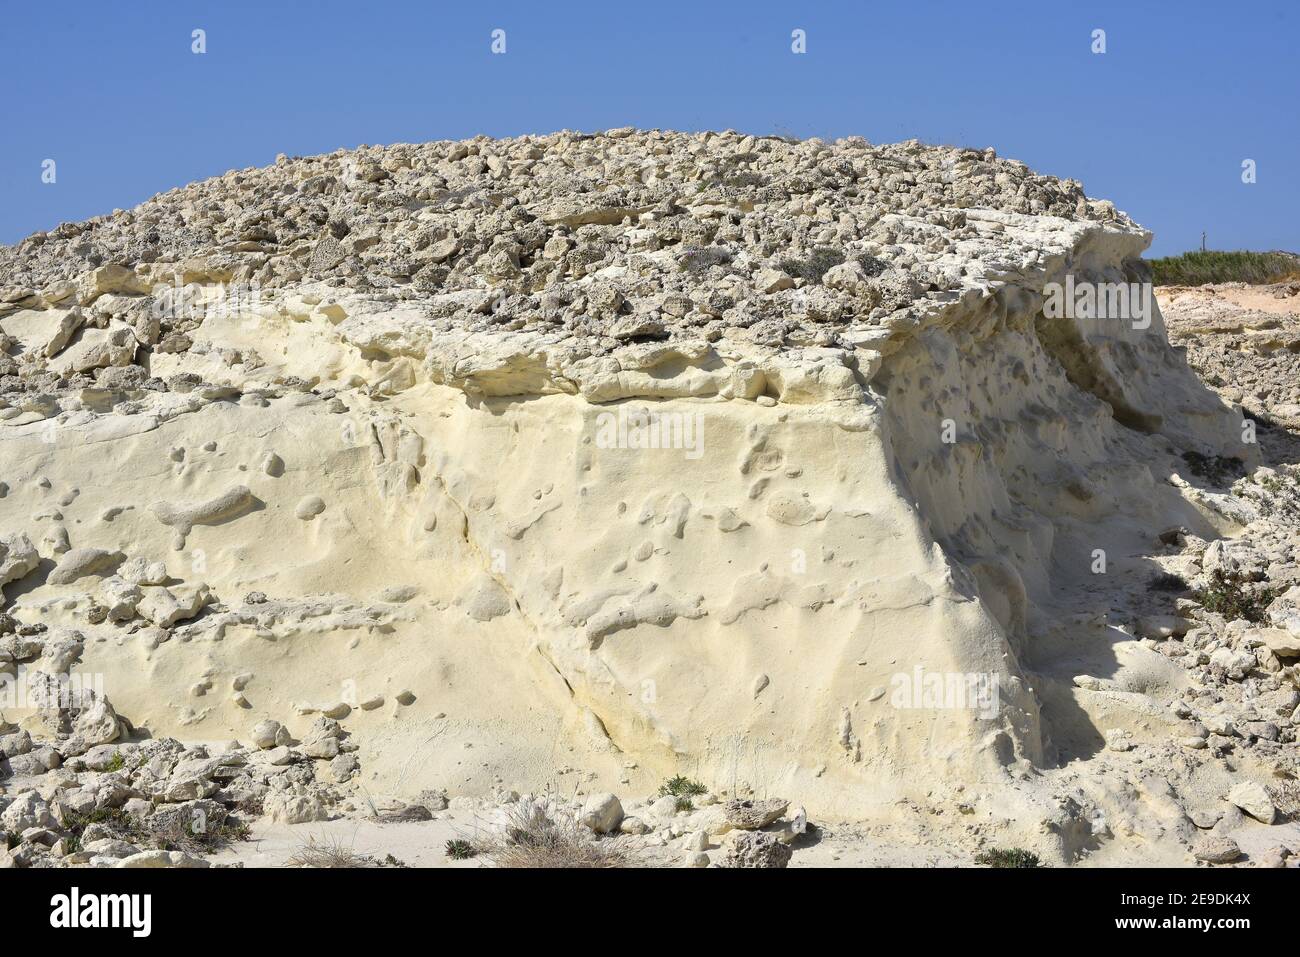 Volcanic coast with consolidated and not consolidated pyroclasts (tuff). Sarakiniko, Milos Island, Greece. Stock Photo